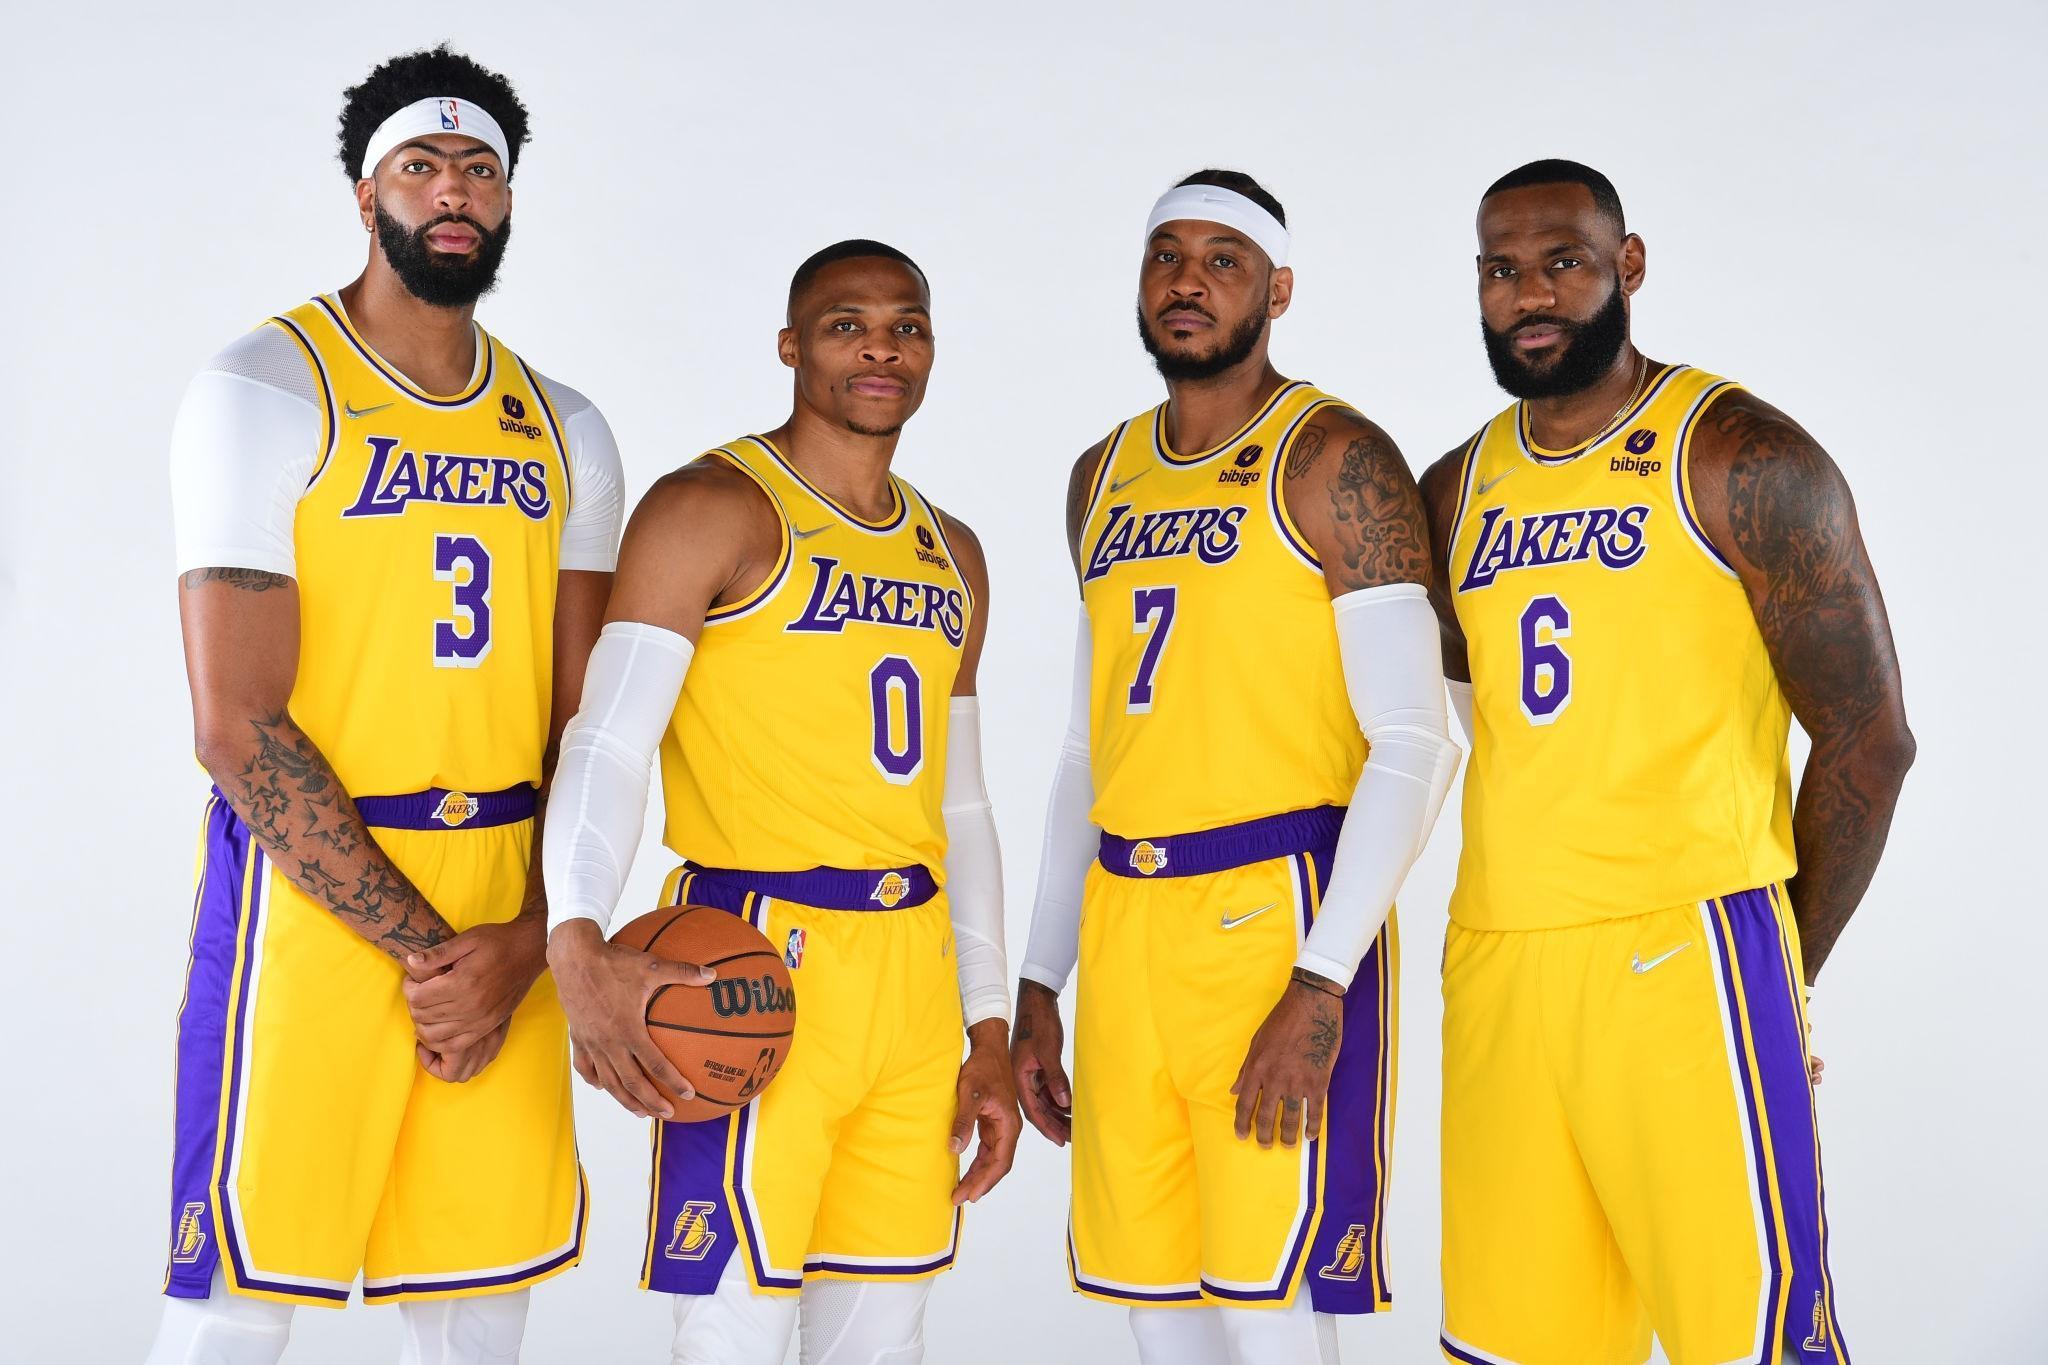 HD wallpaper, Russell Westbrook, Carmelo Anthony, Los Angeles Lakers Hd, Anthony Davis, Lebron James